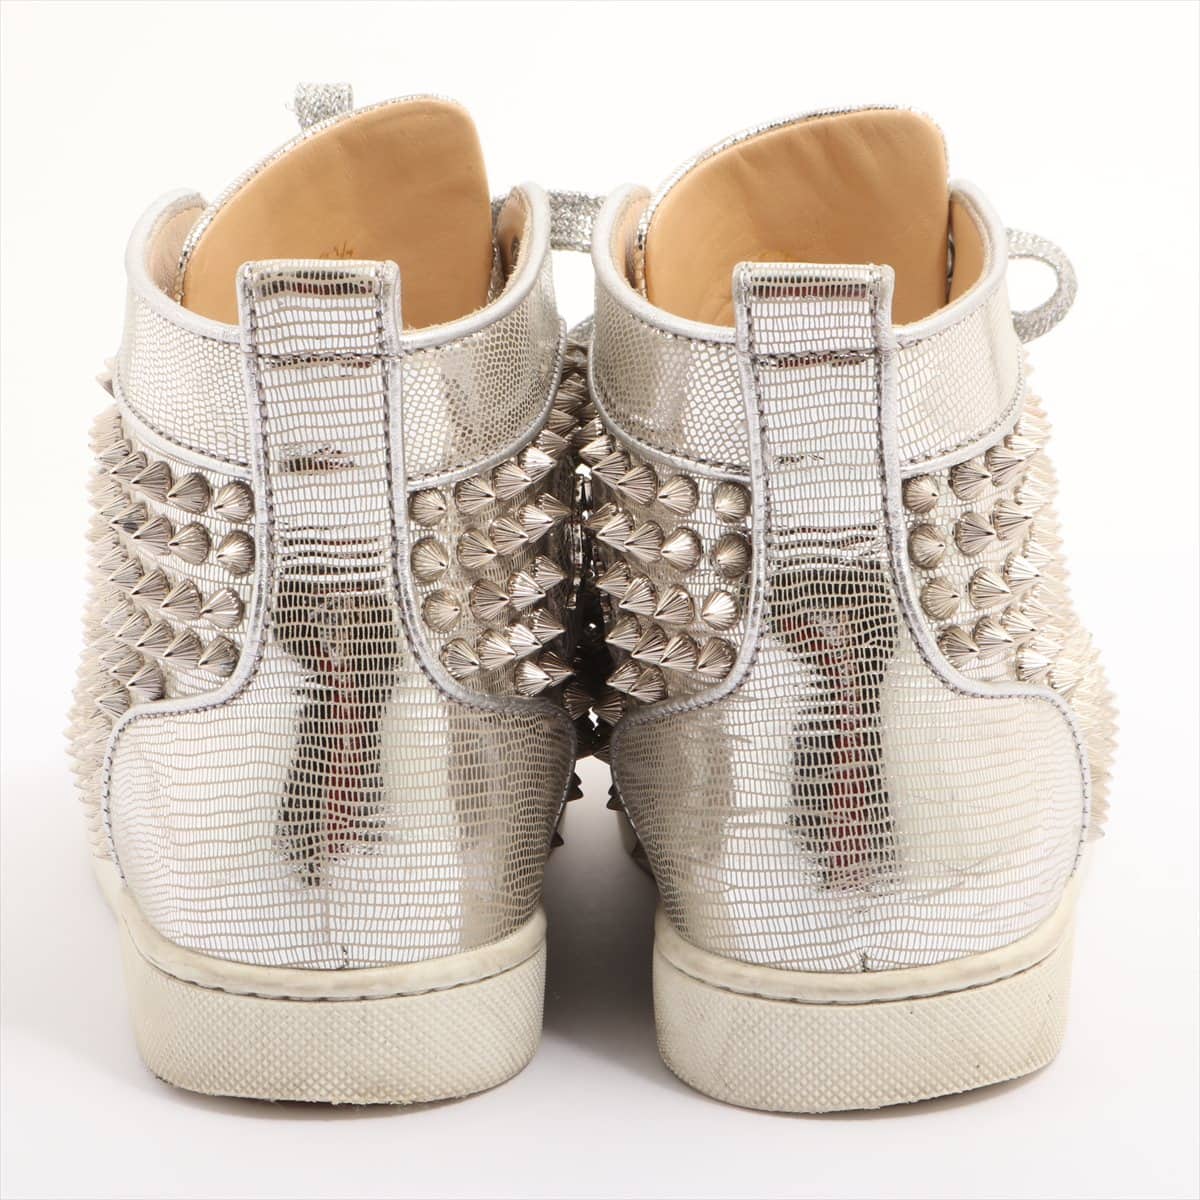 Christian Louboutin Lewis Spike Patent leather High-top Sneakers 36 1/2 Ladies' Silver